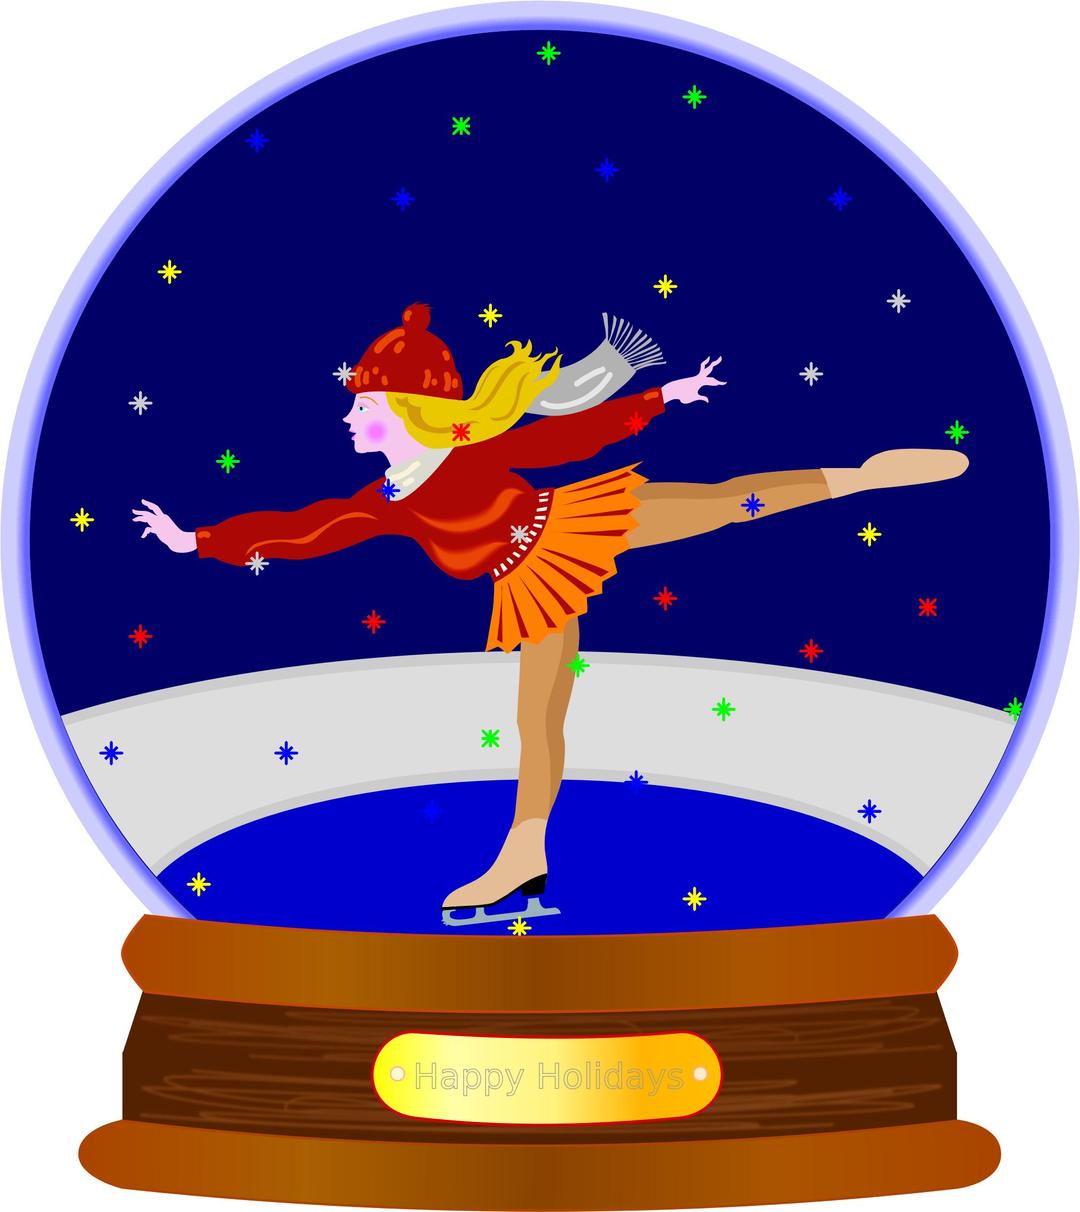 Animated Colored Snow Globe png transparent